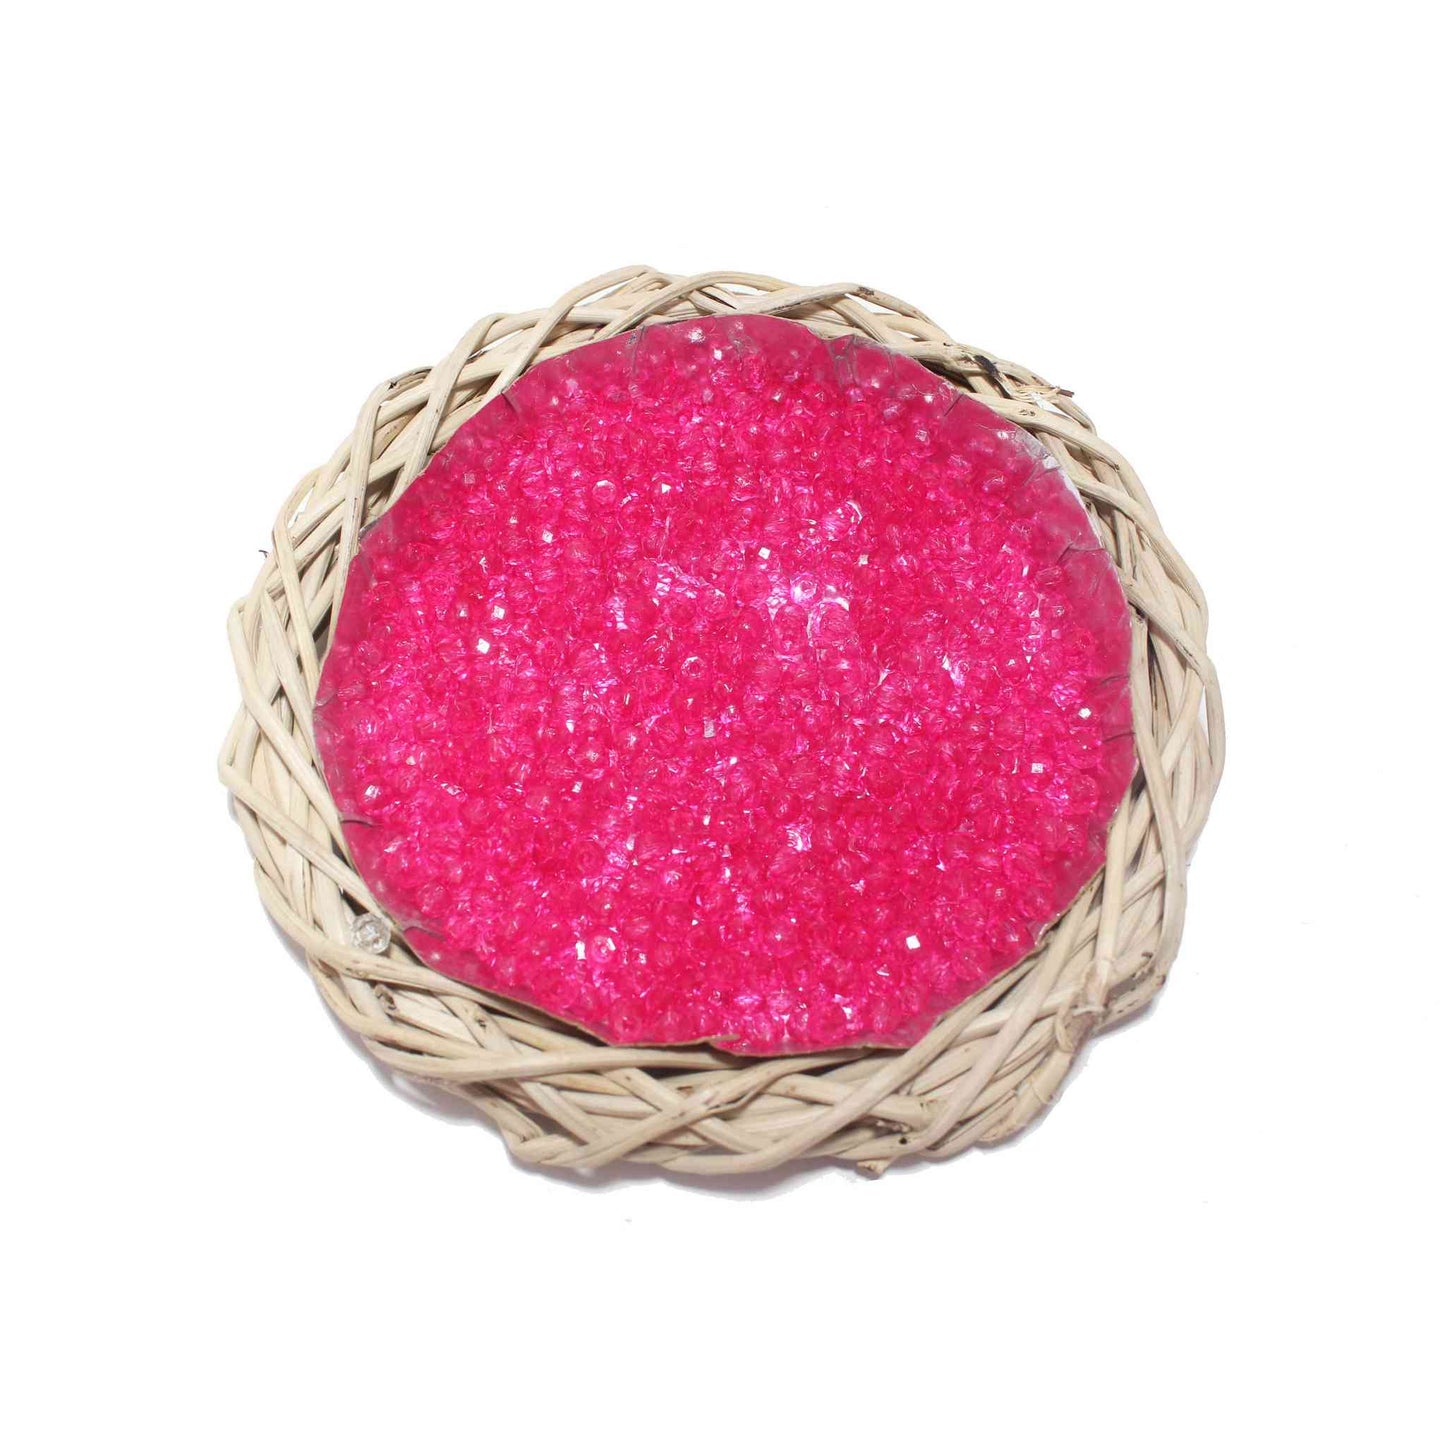 Indian Petals Premium quality small Glass Beads for DIY Craft, Trousseau Packing or Decoration - Design 721, Hot Pink - Indian Petals